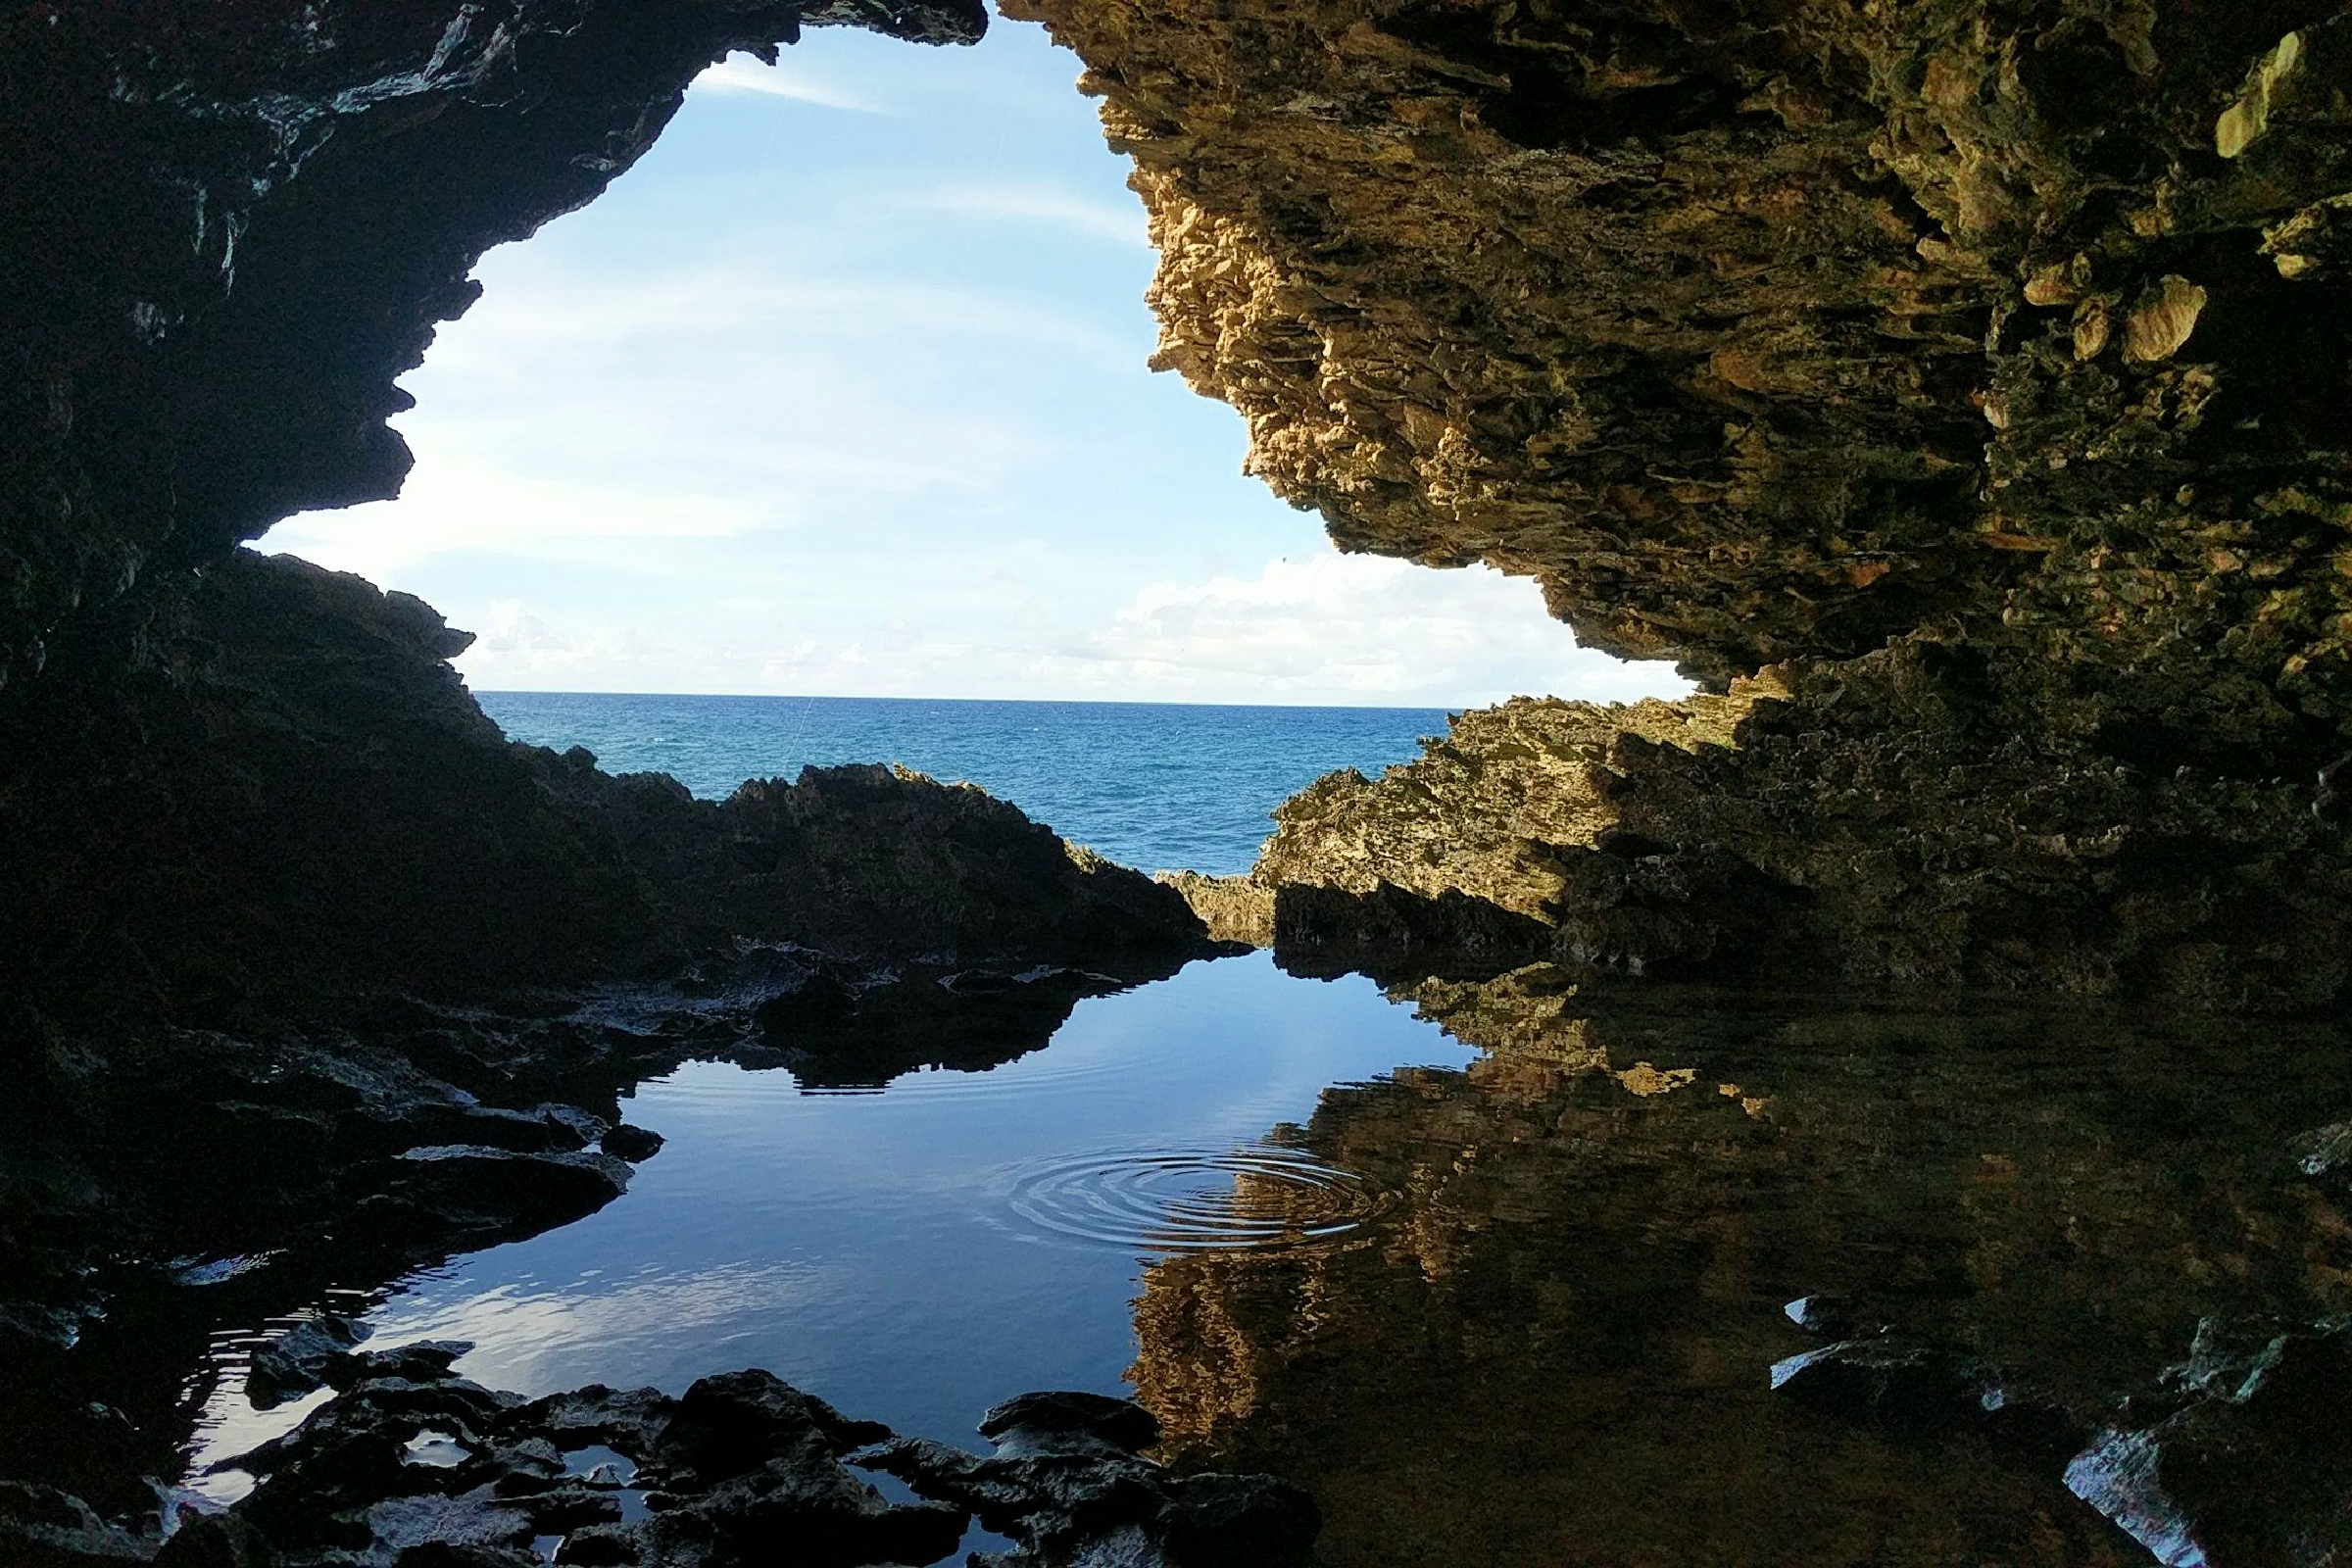 Explore Animal Flower Cave at St. Lucy’s Craggy Cliffs